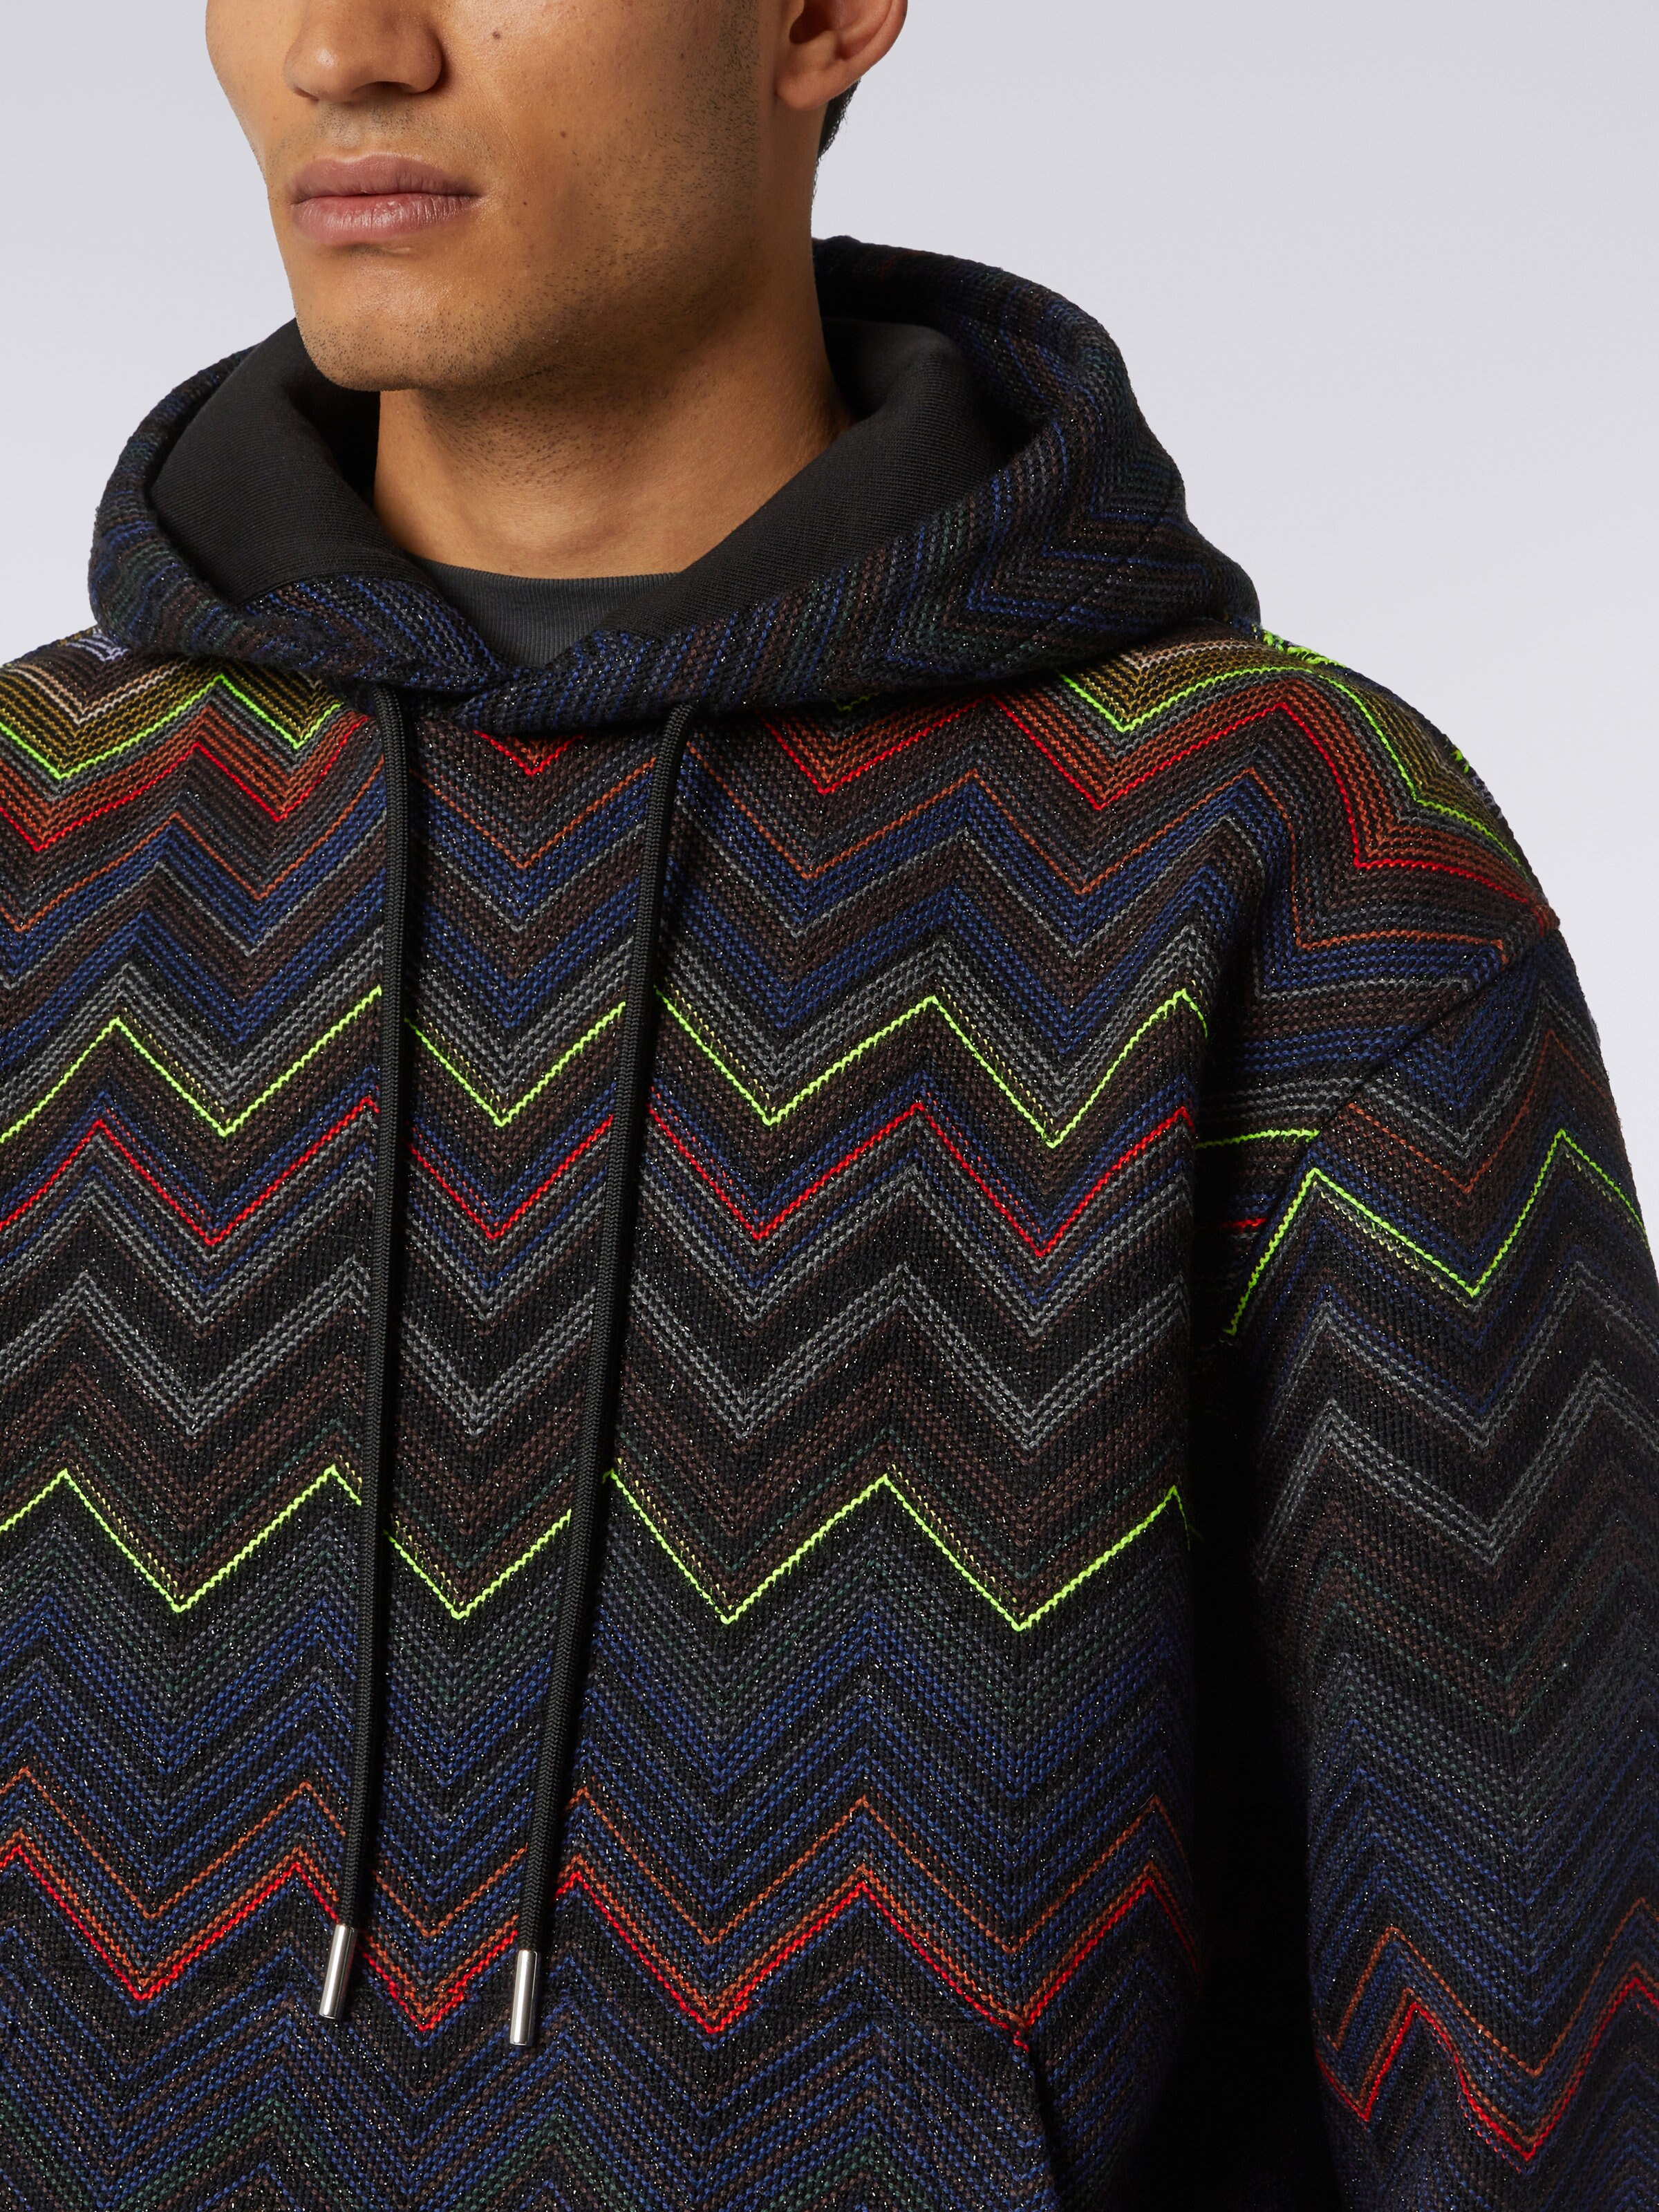 Hoodie with pouch pocket in collaboration with Mike Maignan, Multicoloured - 4